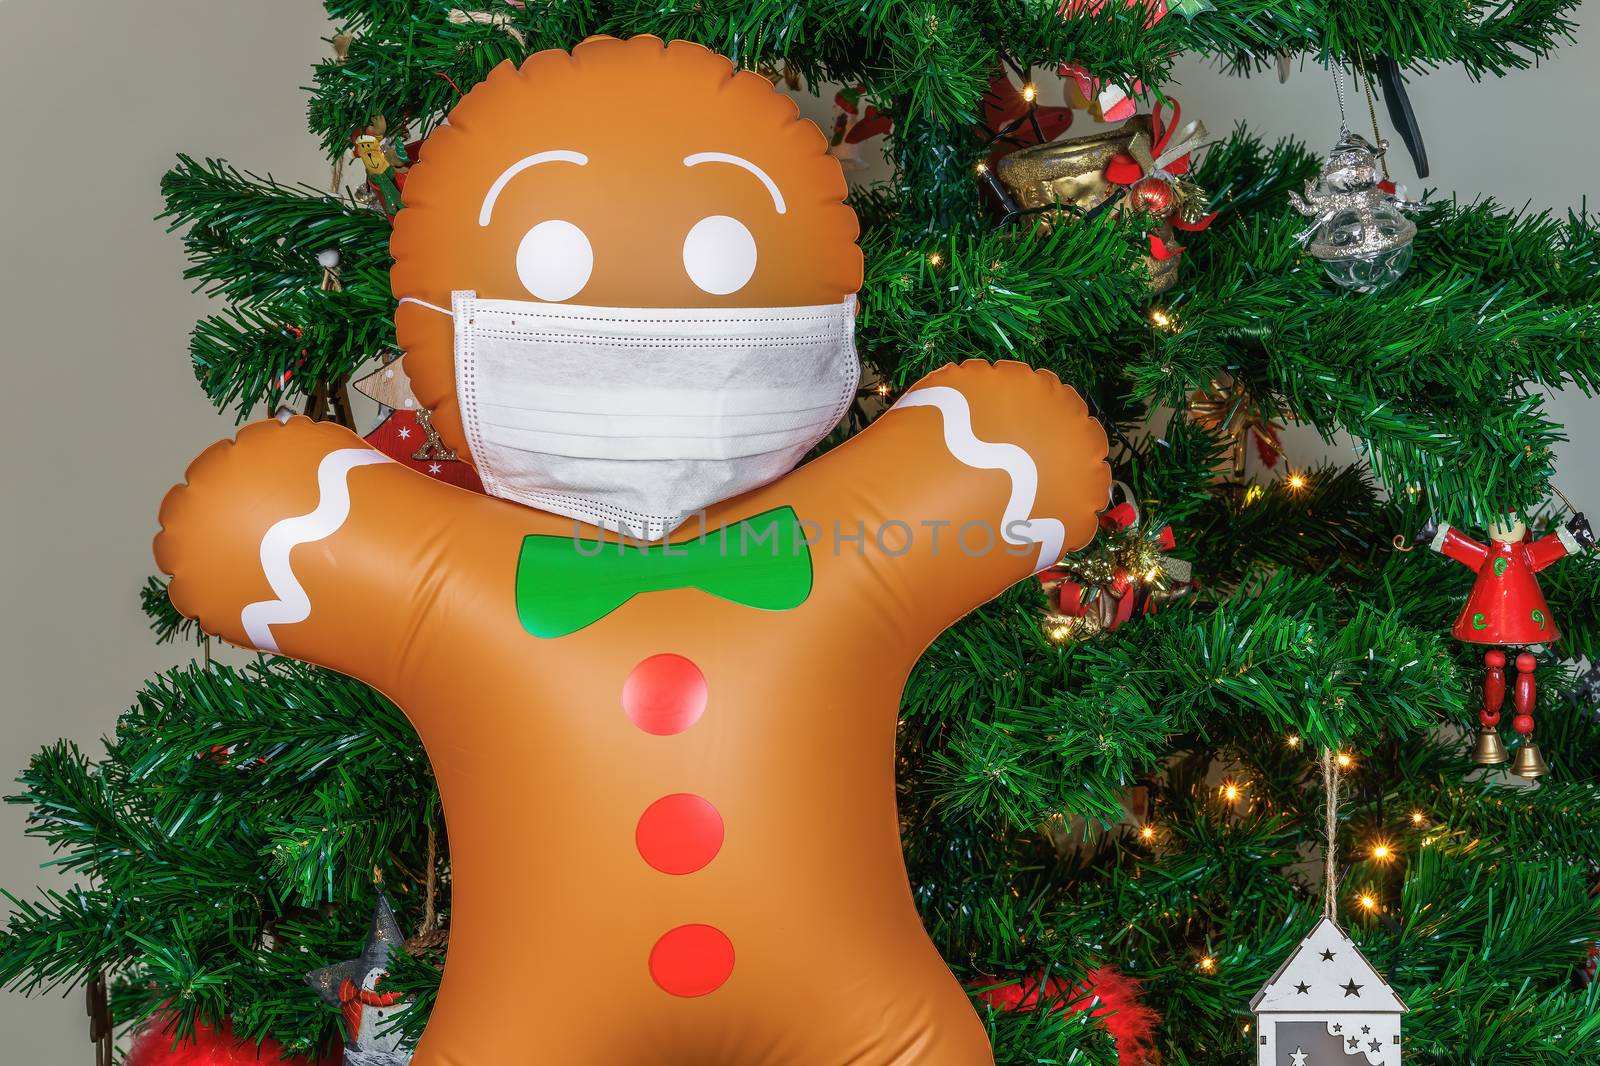 Air blown seasonal gingerbread figure before illuminated artificial decorated green tree with lights.